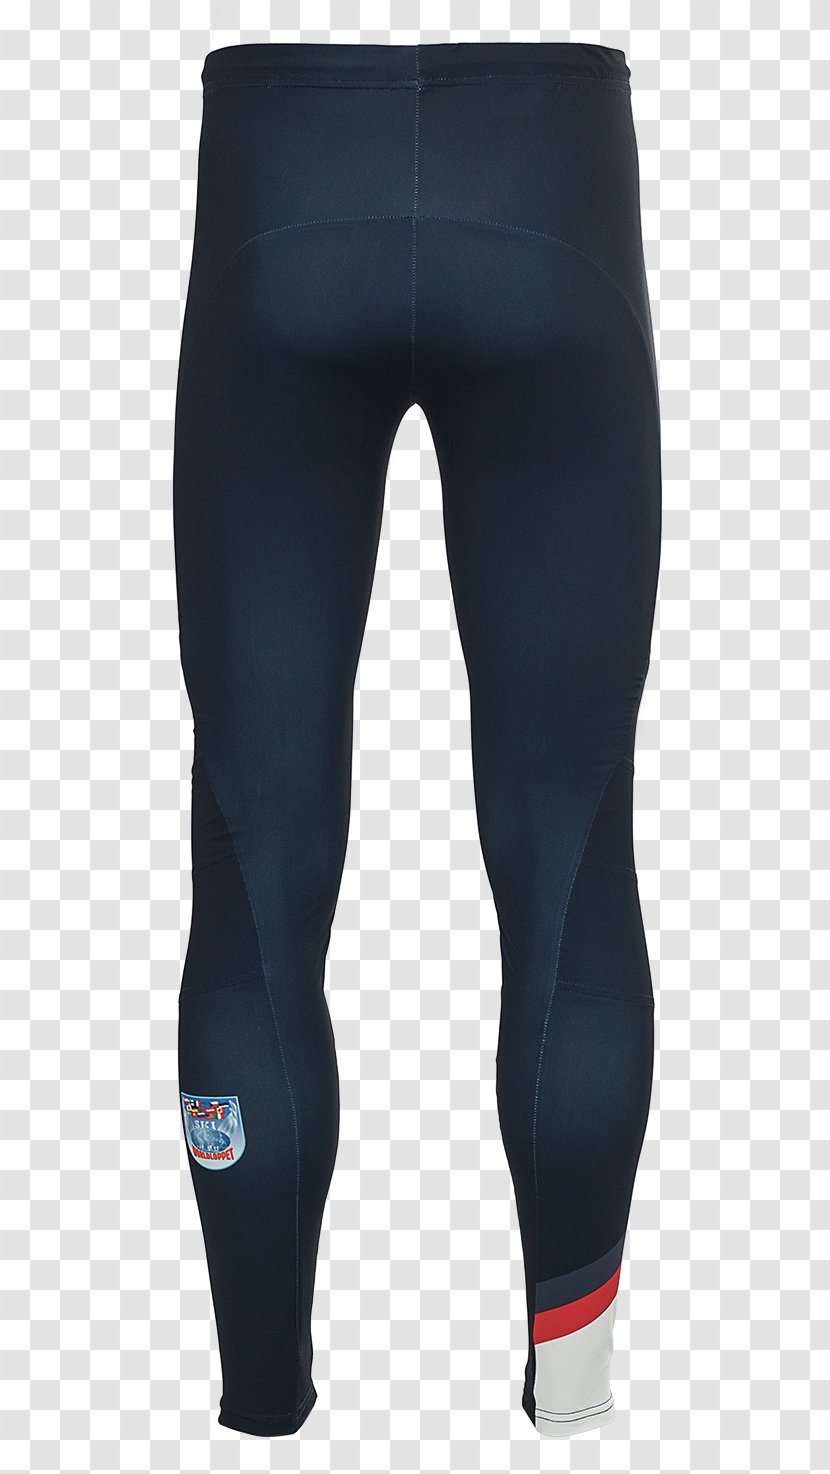 Worldloppet Ski Federation Cross-country Skiing Suit Leggings - Watercolor Transparent PNG